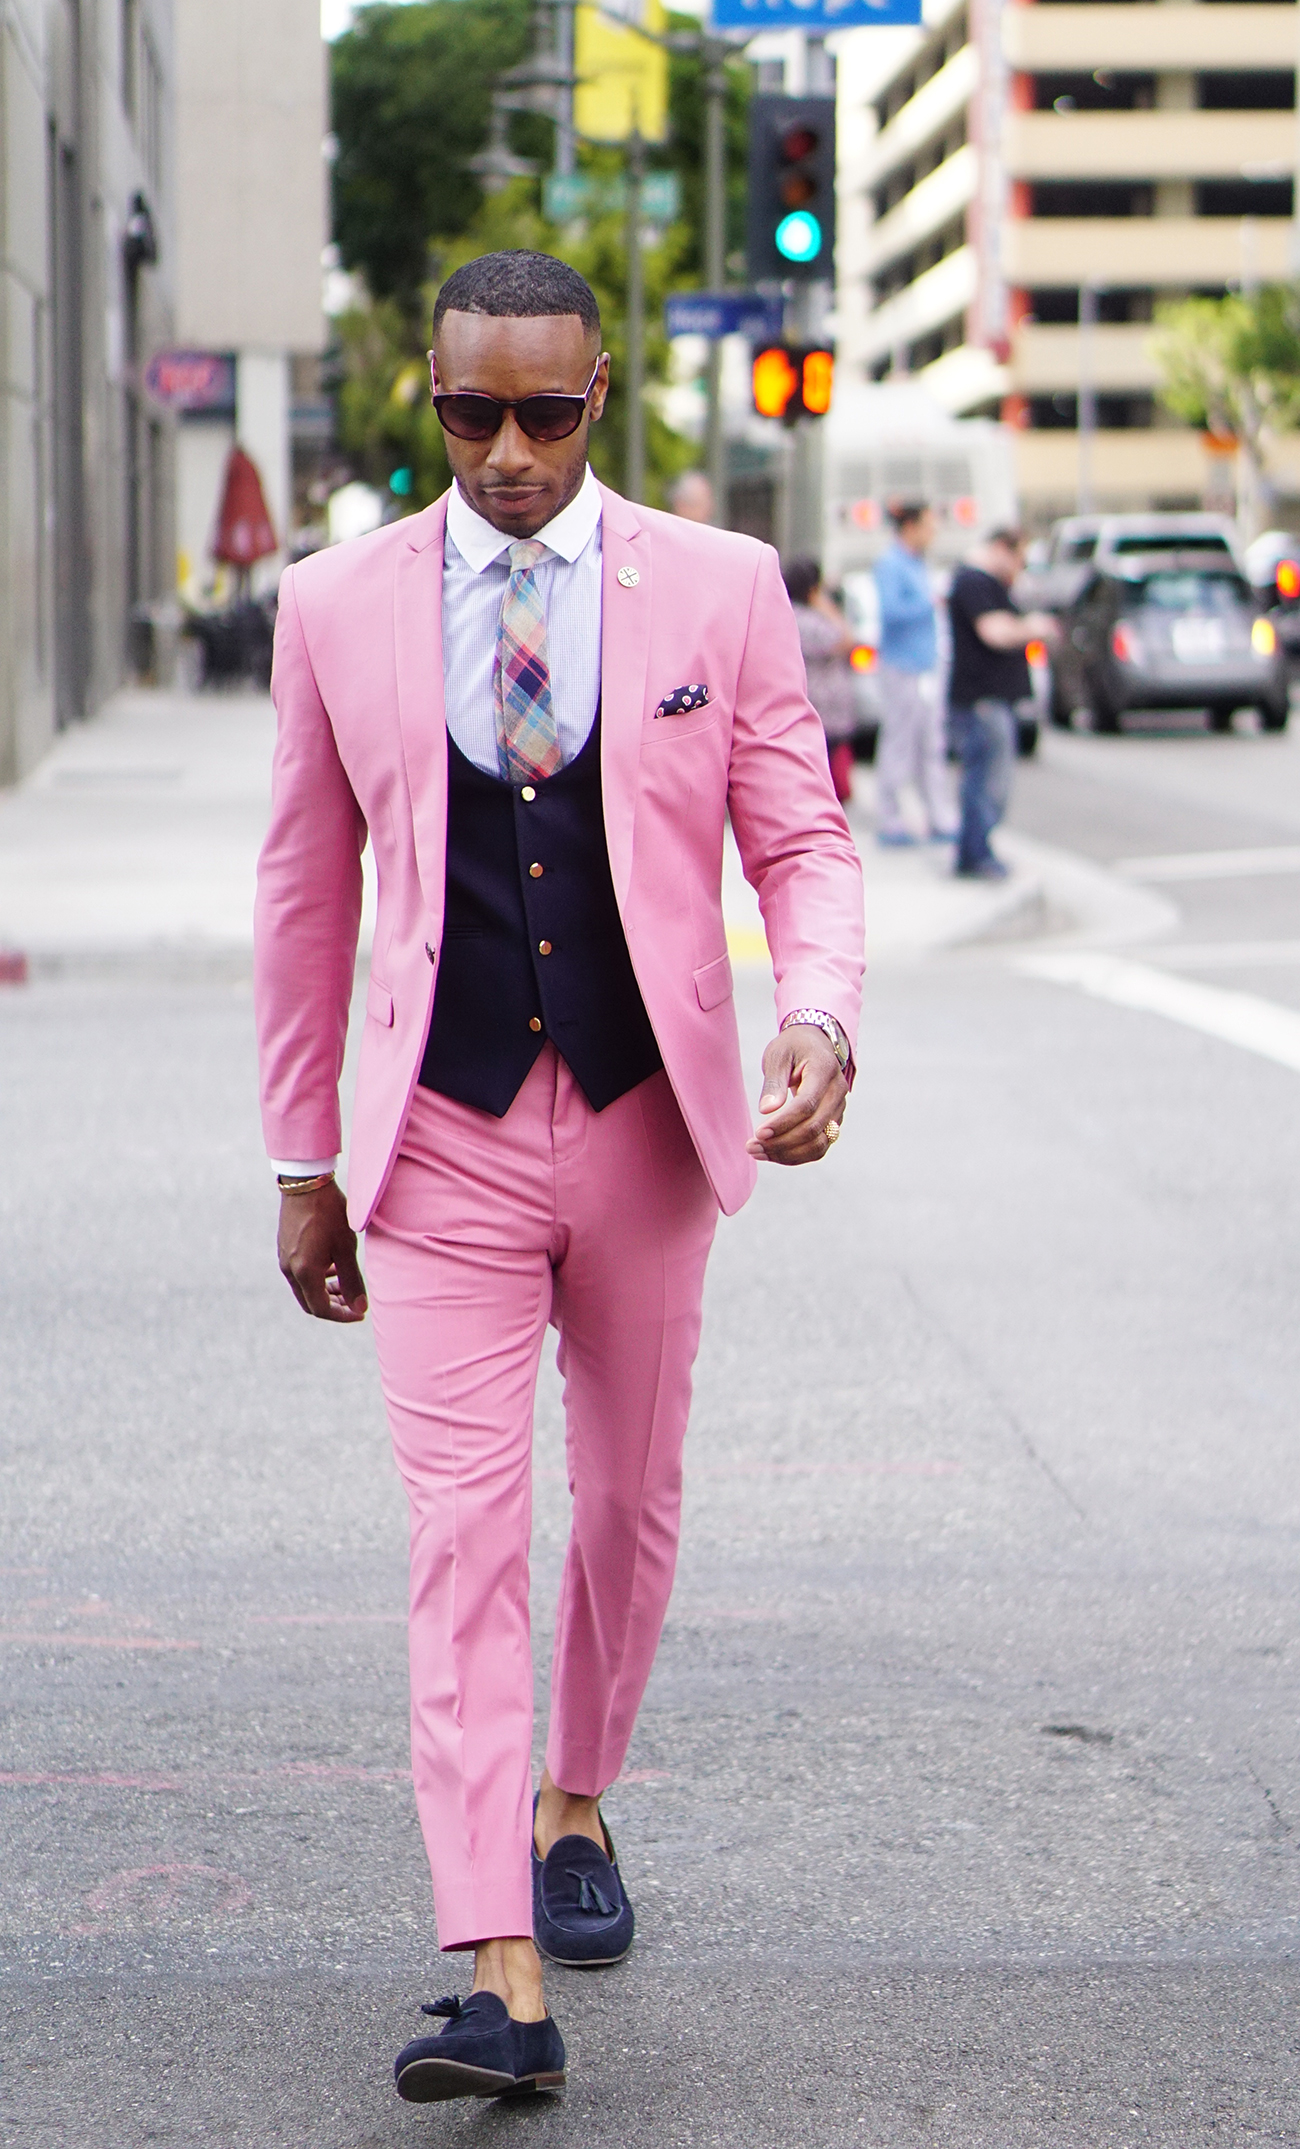 HOW TO CHANGE THE LOOK OF YOUR SUIT – Norris Danta Ford